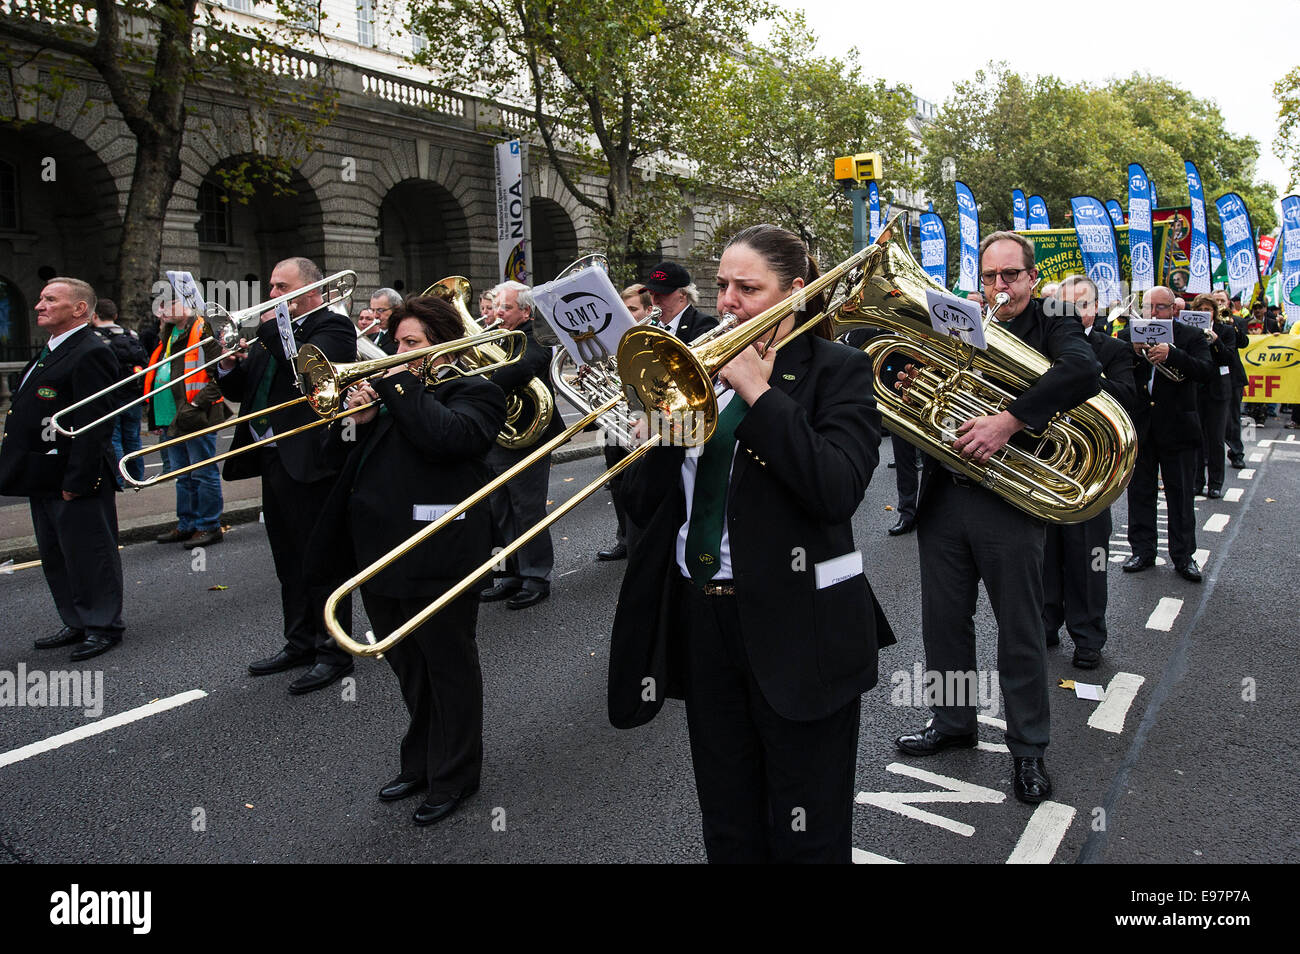 A TUC national demonstration in Central London. The RMT Brass band plays as the march sets off. Stock Photo